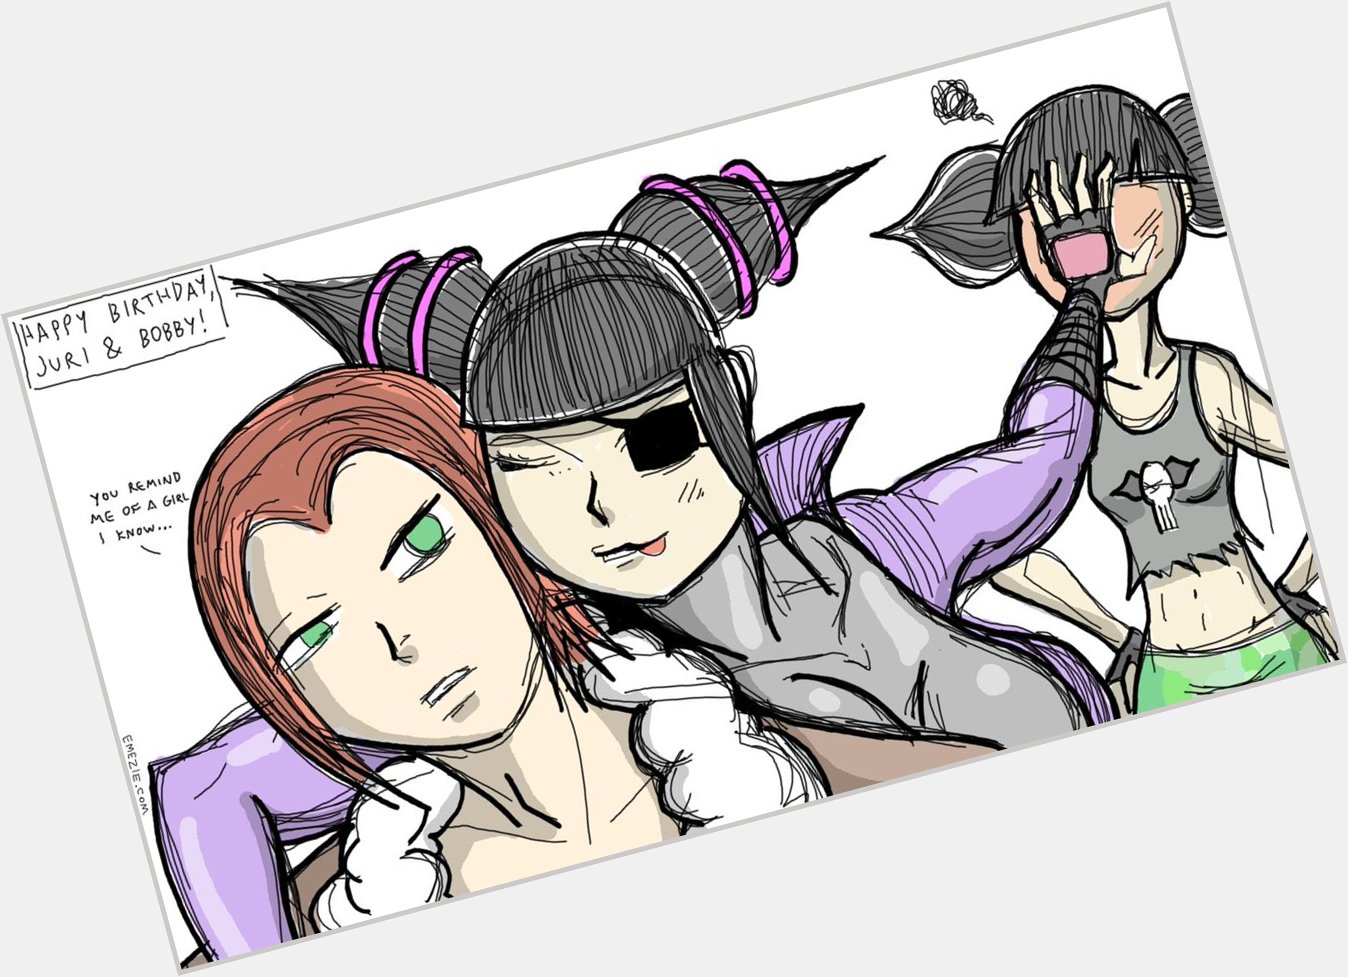 Happy Birthday to Juri from Mai Shiranui from and Bobby Sykes from...me, I guess! 